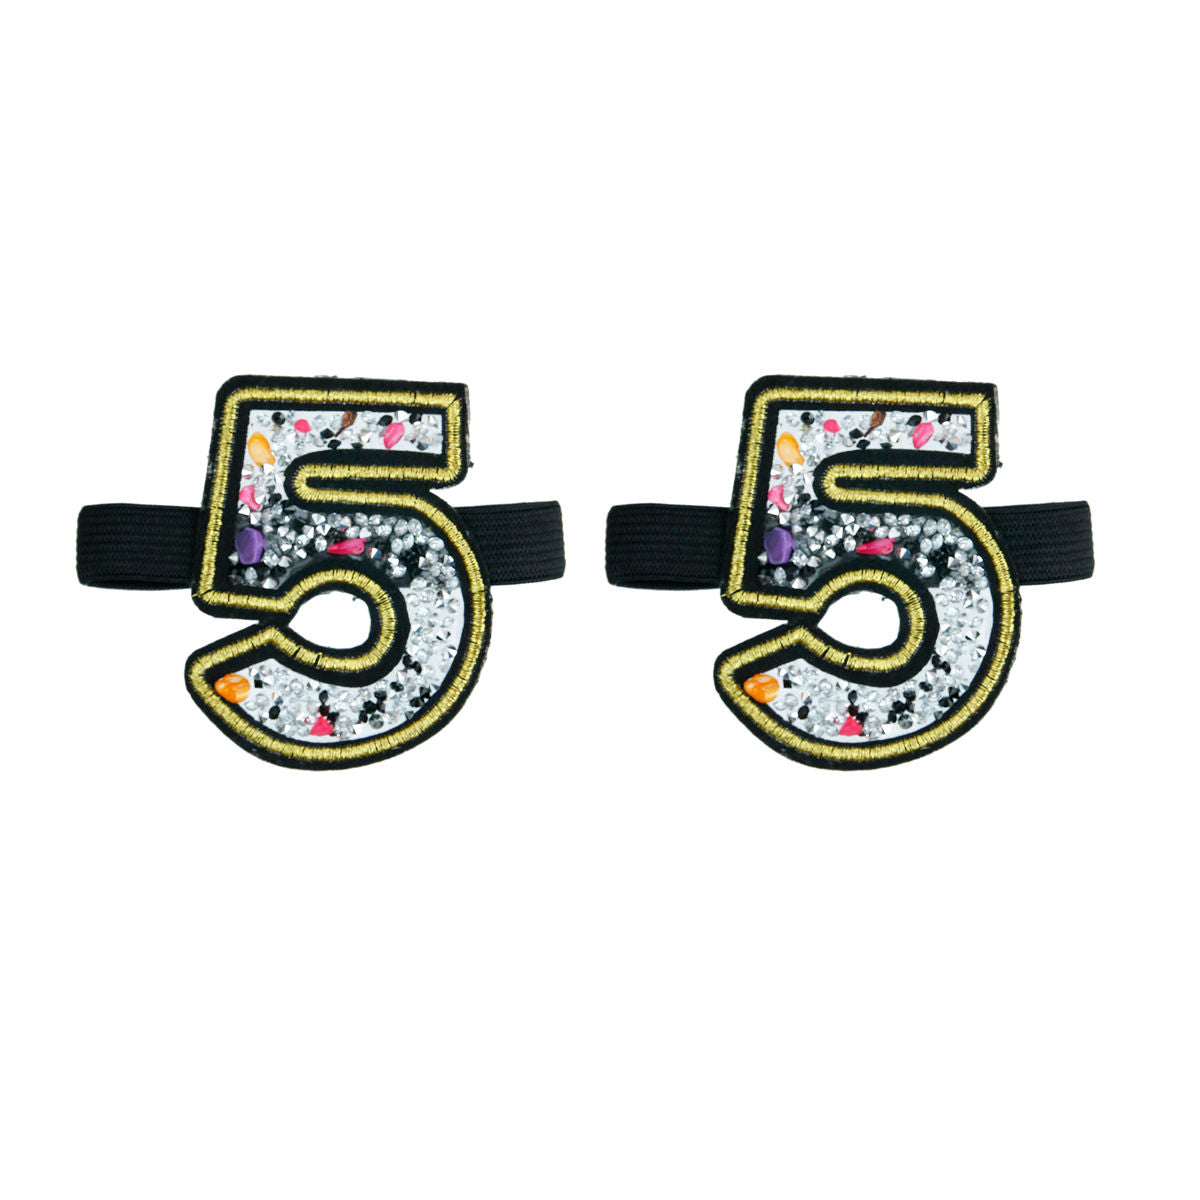 Pair of Rhinestone and Multi Color Stone Number 5 Shoe Bands